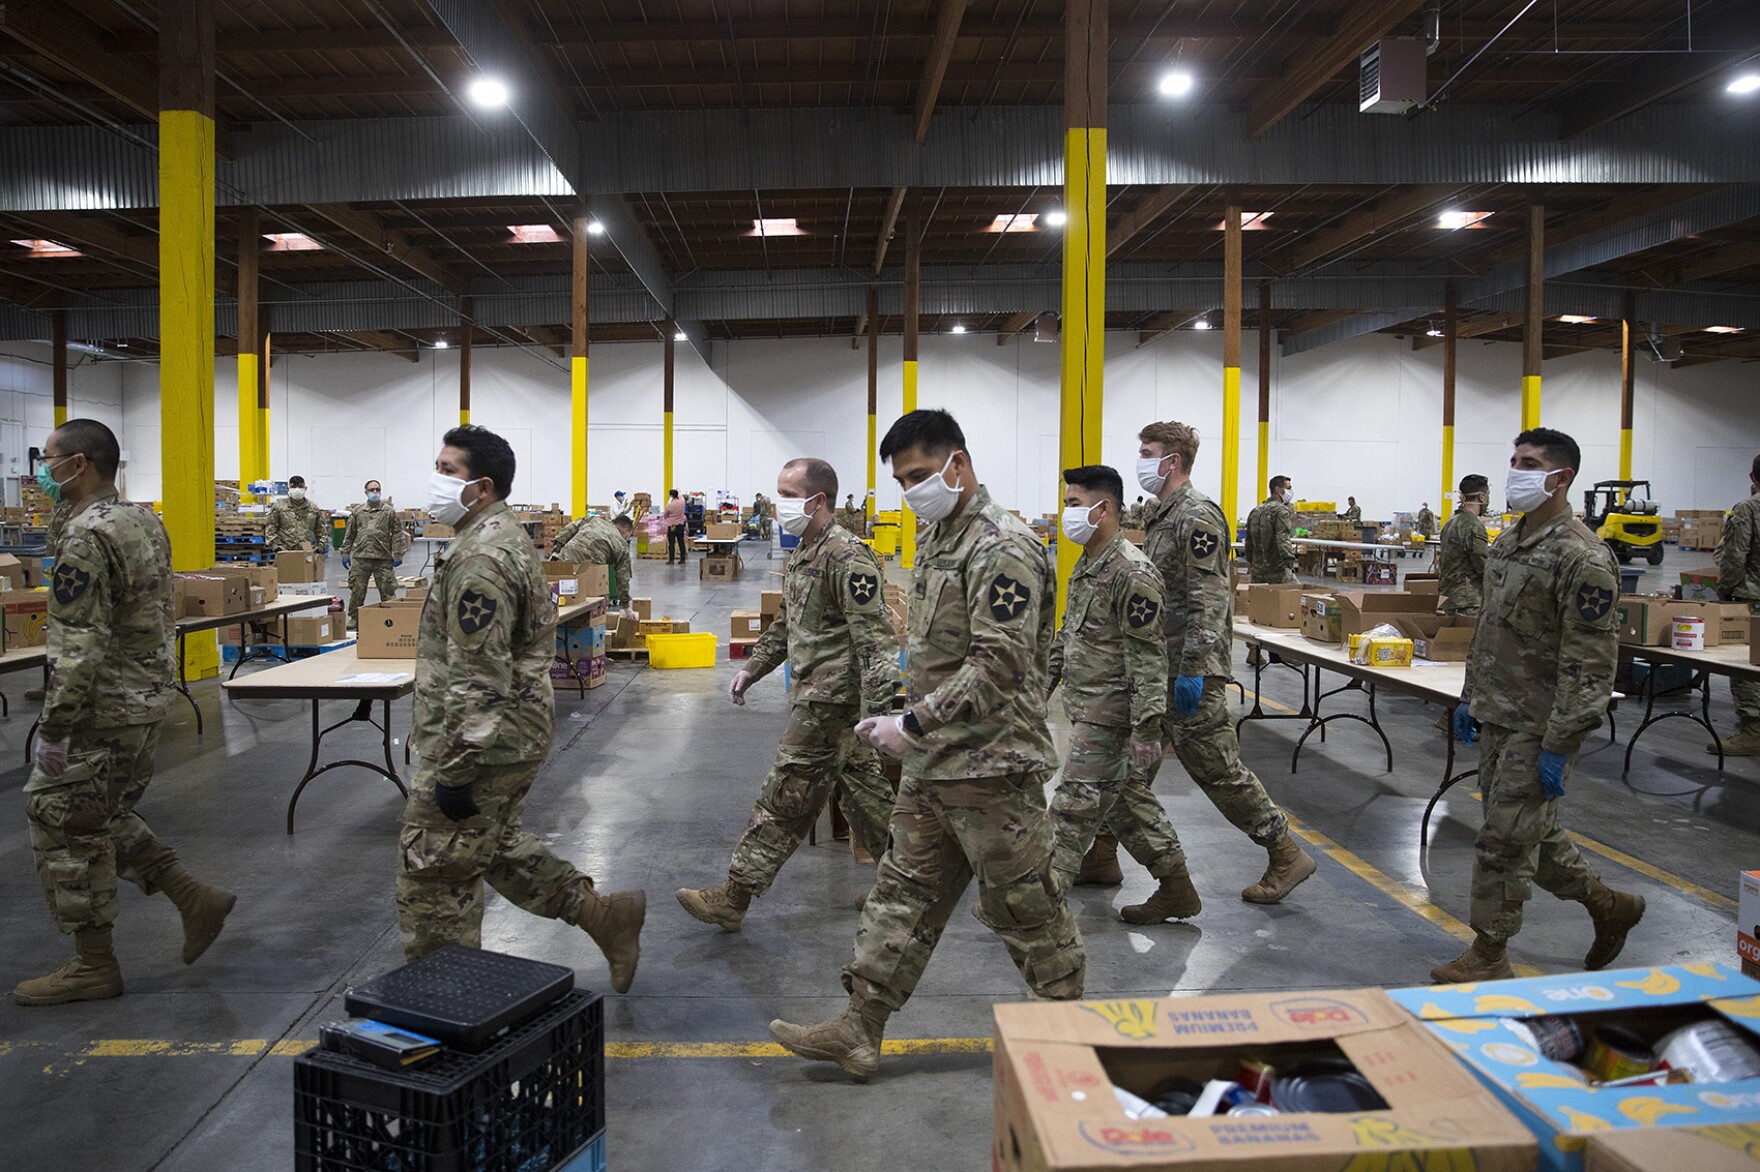 Washington National Guard soldiers walk through the Food Lifeline Covid Response Center on Tuesday, April 21, 2020, along East Marginal Way South in Seattle.